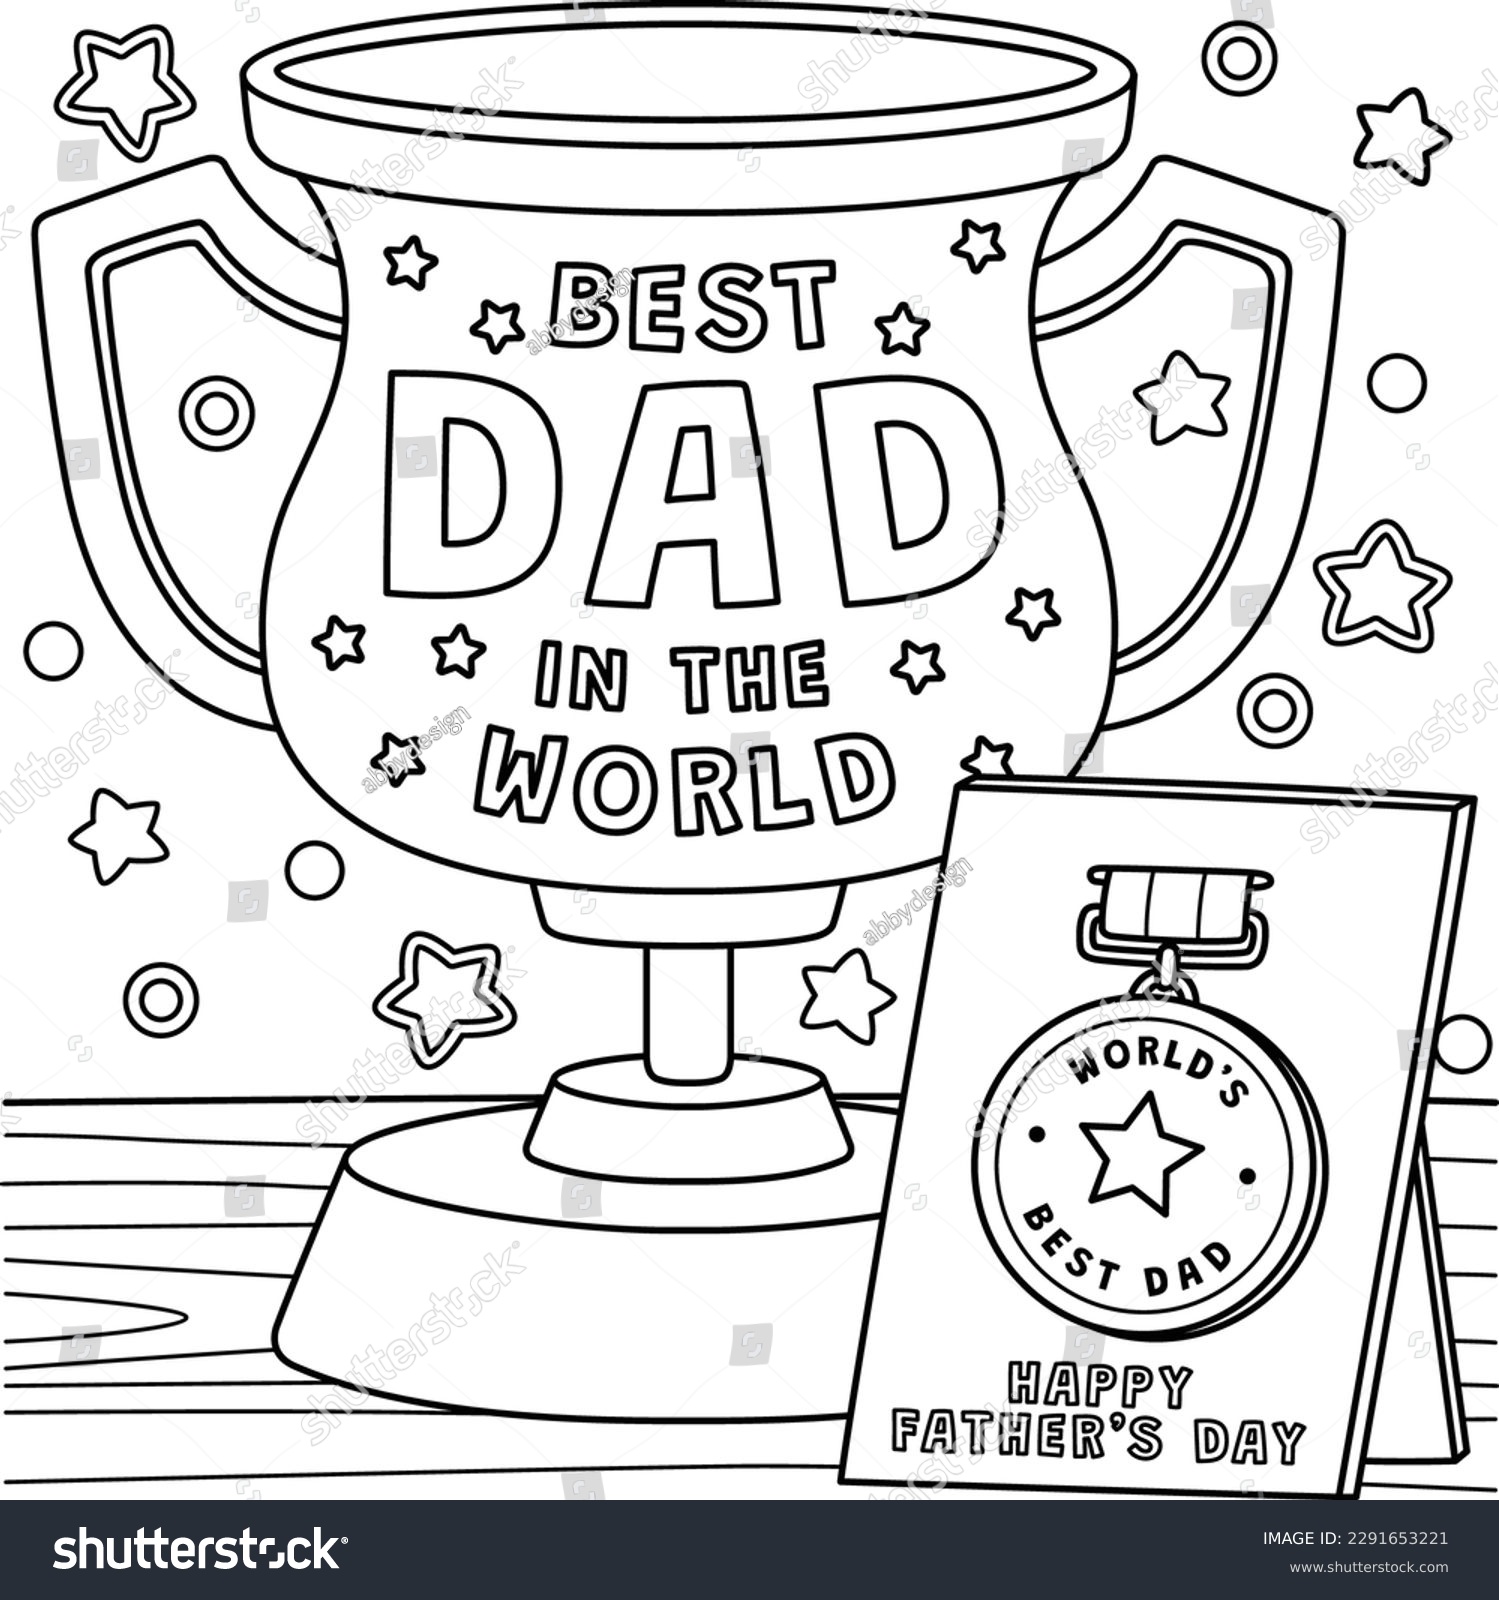 Happy fathers day coloring page photos and images